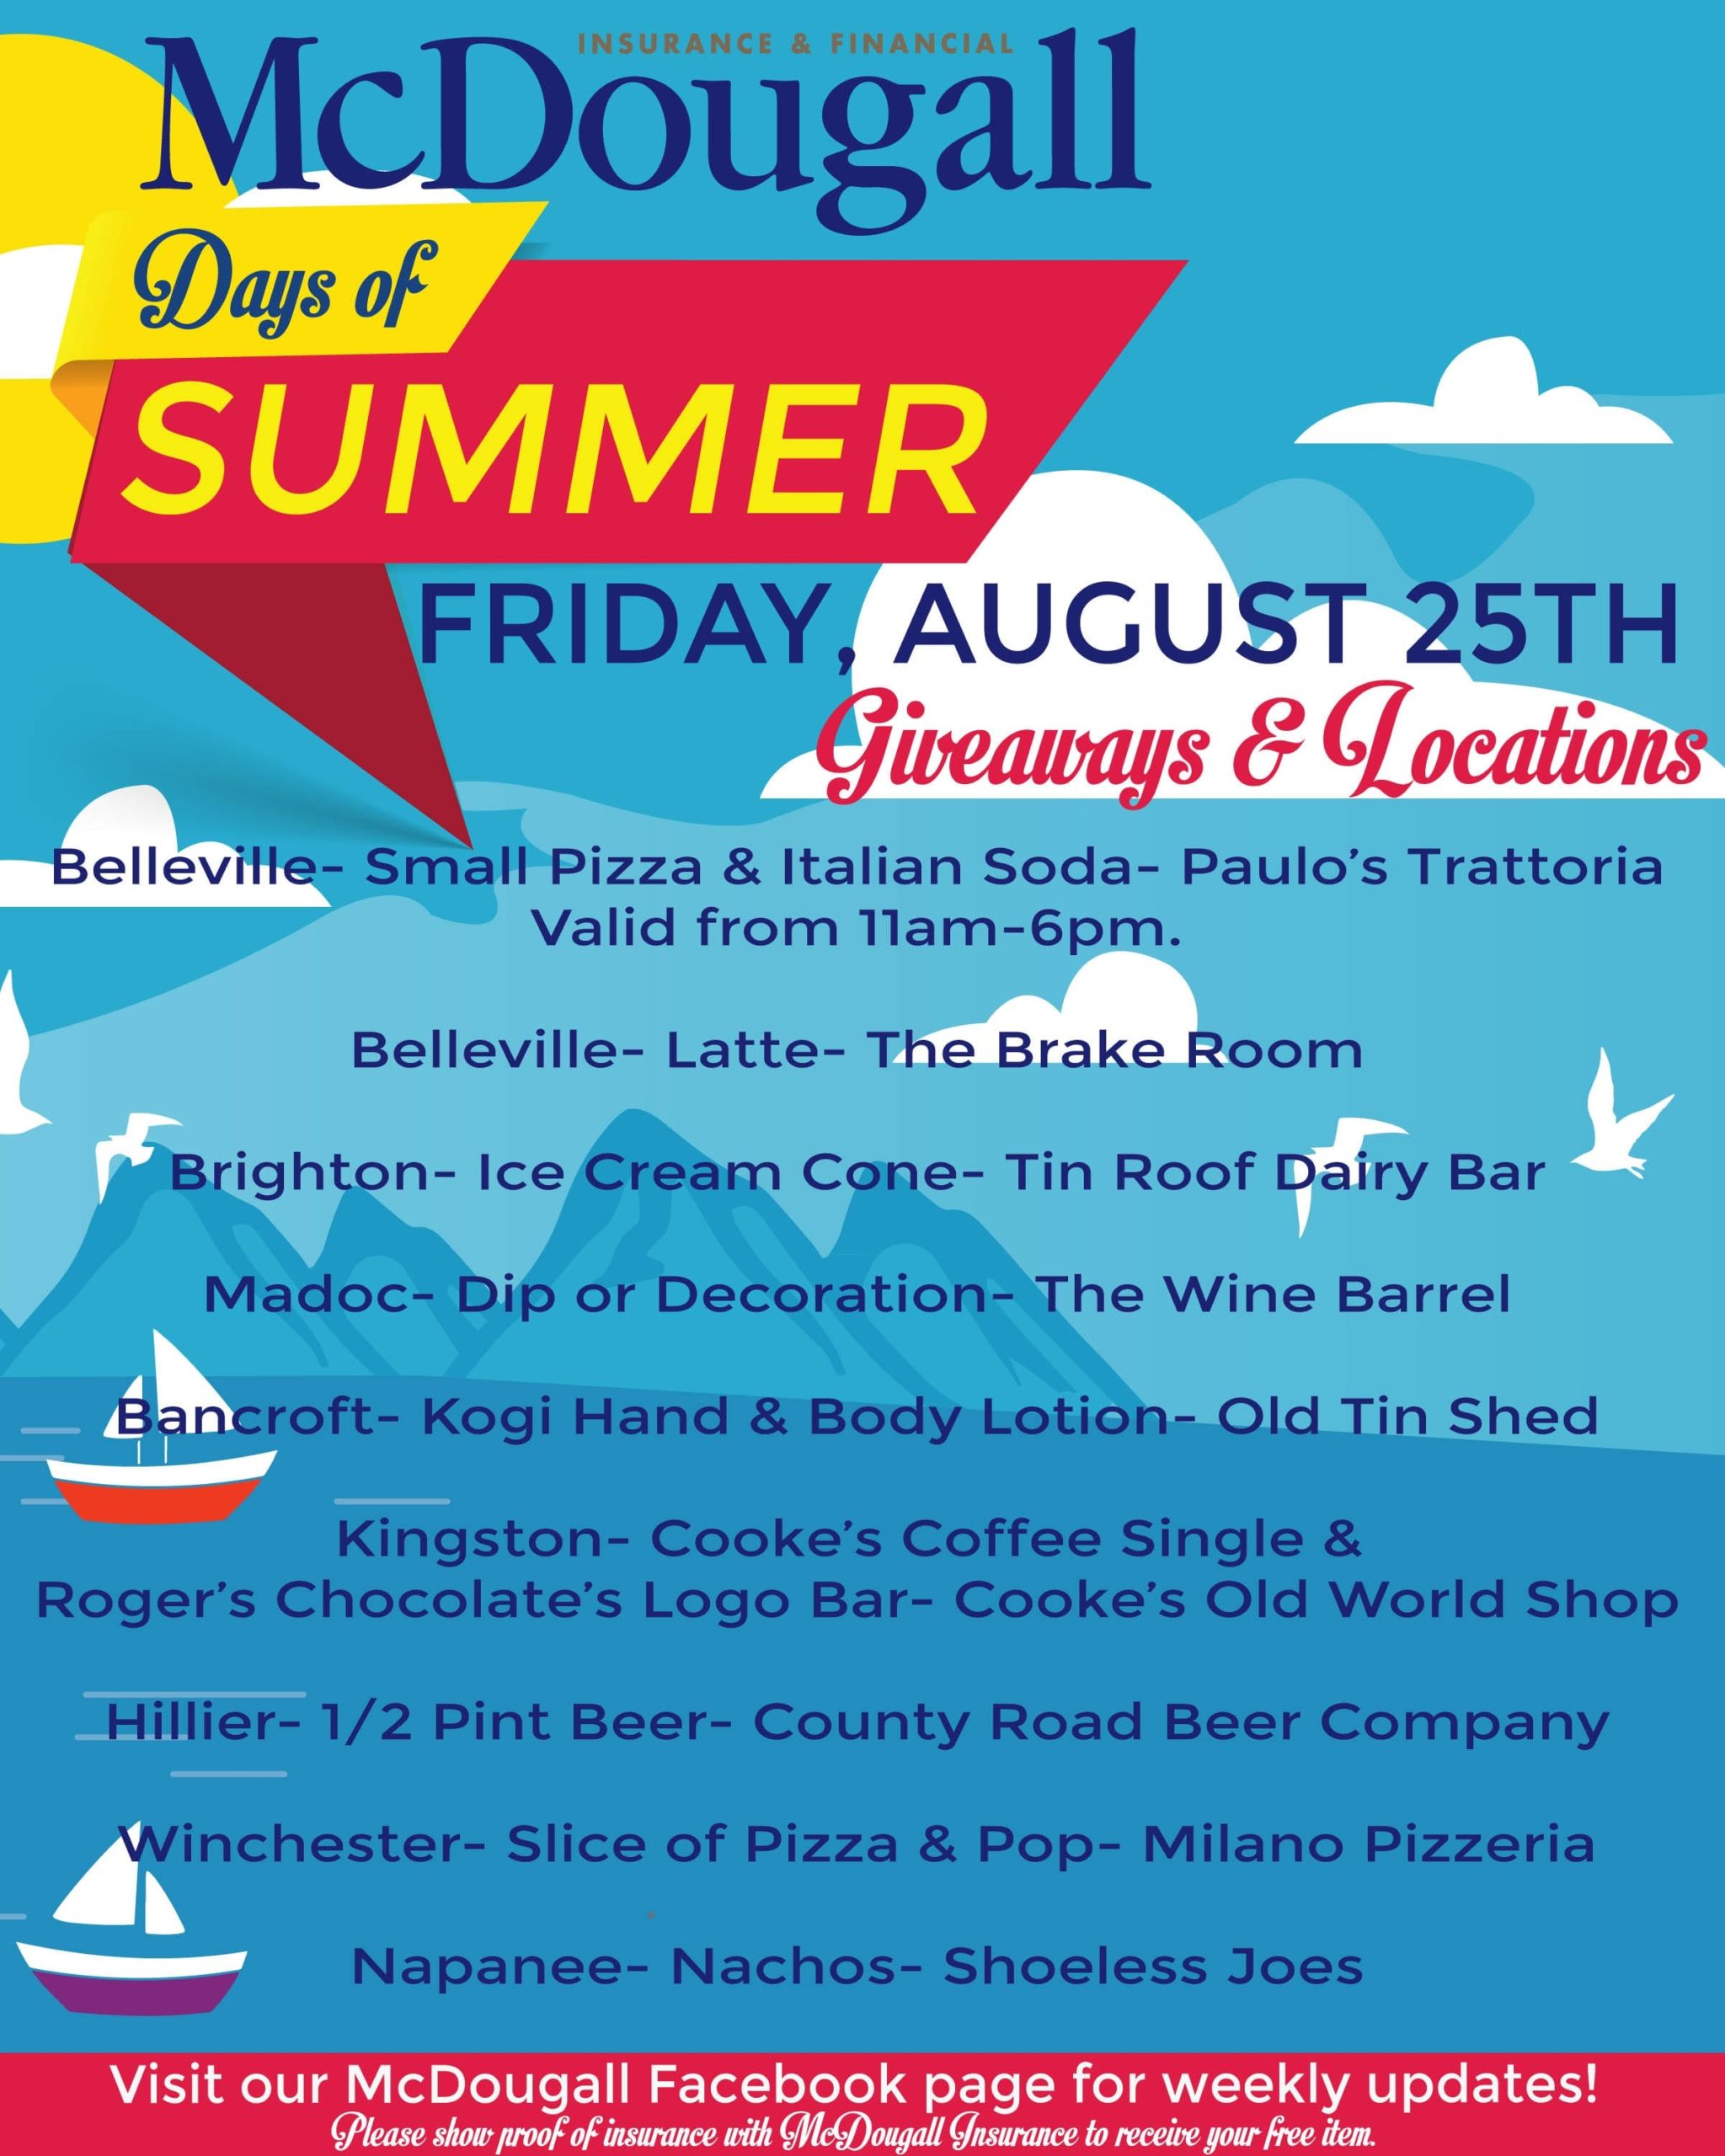 mcdougall days of summer august 25th